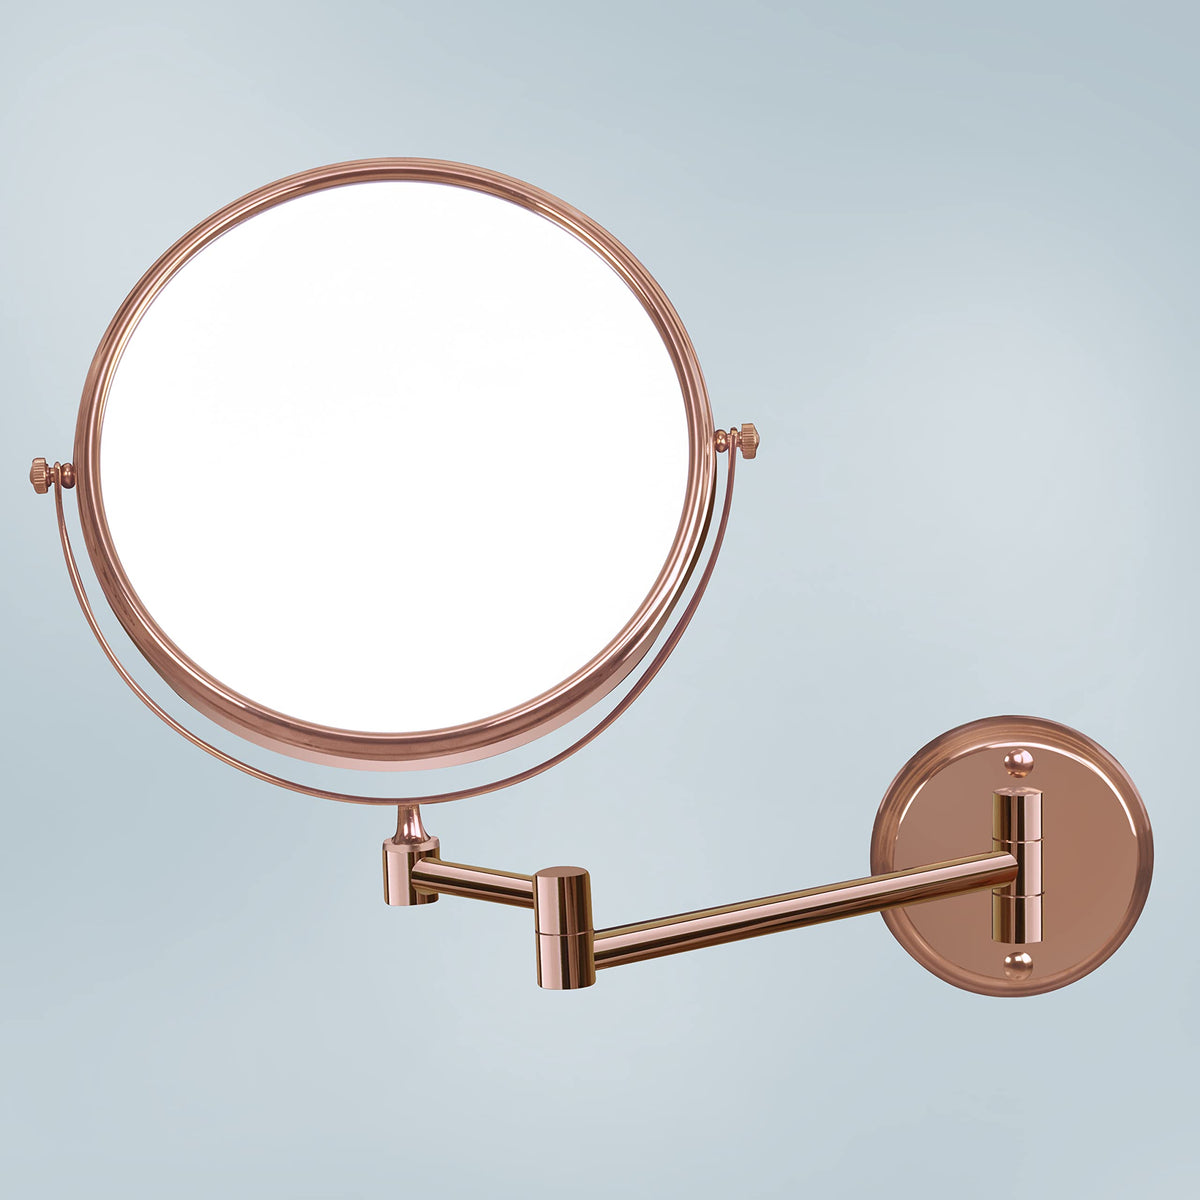 Plantex Stainless Steel Body Two-Sided 360° Swivel Mirror/Makeup Mirror/Vanity Mirror Wall Mounted with 10X Magnification,Rose-Gold Finish (8 inches-10x)